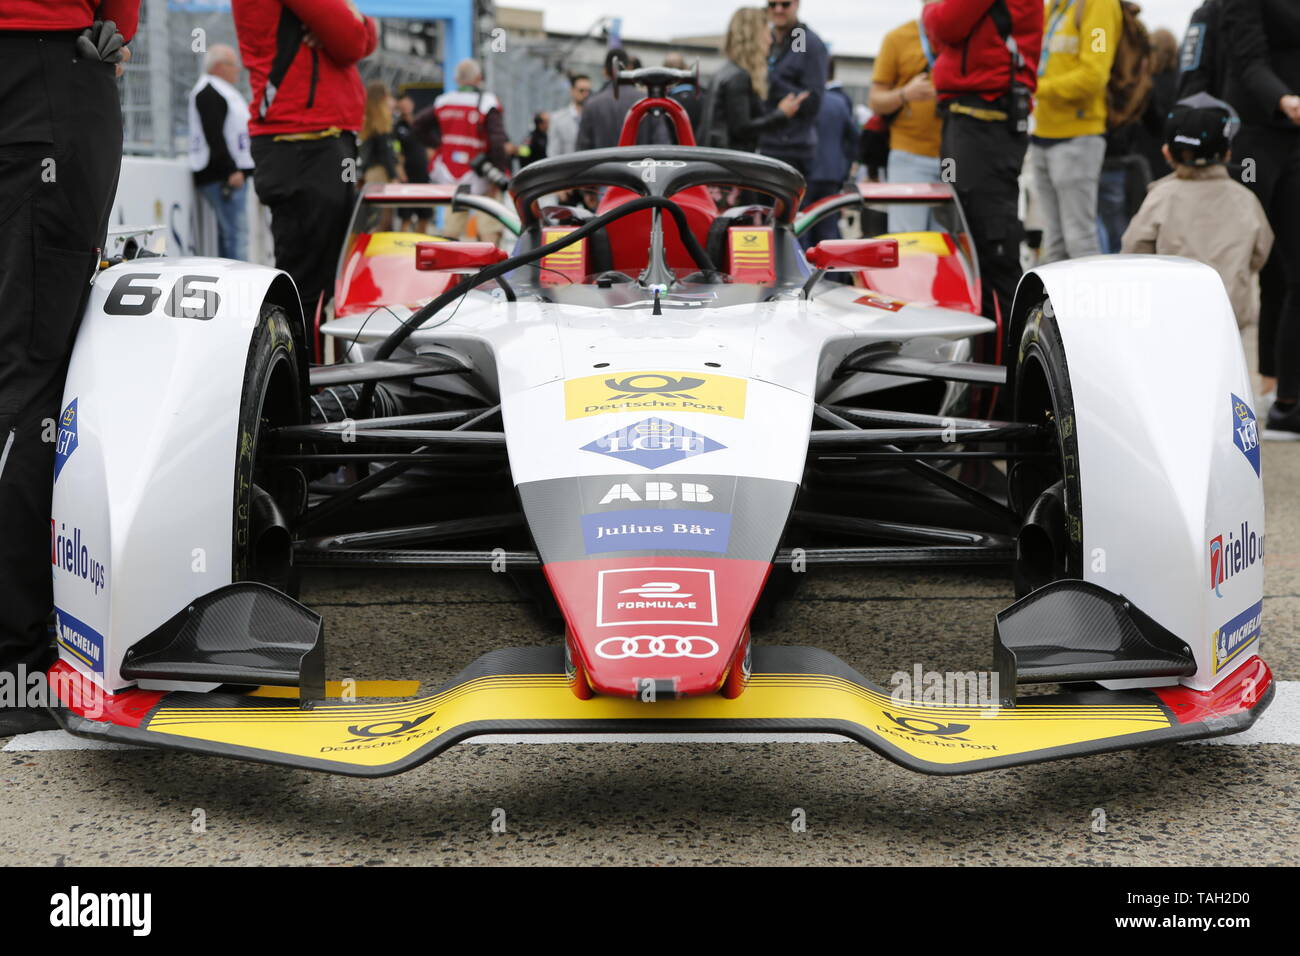 25.05.2019, Berlin, Germany.Daniel Abt at the grid. Lucas Di Grassi from the Audi Sport Abt Schaeffler team wins the Berlin ePrix. Sébastien Buemi from the team Nissan e.dams wins the second place and Jean-Eric Vergne from the team DS TECHEETAH wins the third place. The Formula E will be on the 25th of May 2019 for the fifth time in Berlin. The electric racing series 2018/2018 will take place at the former Tempelhof Airport. Stock Photo